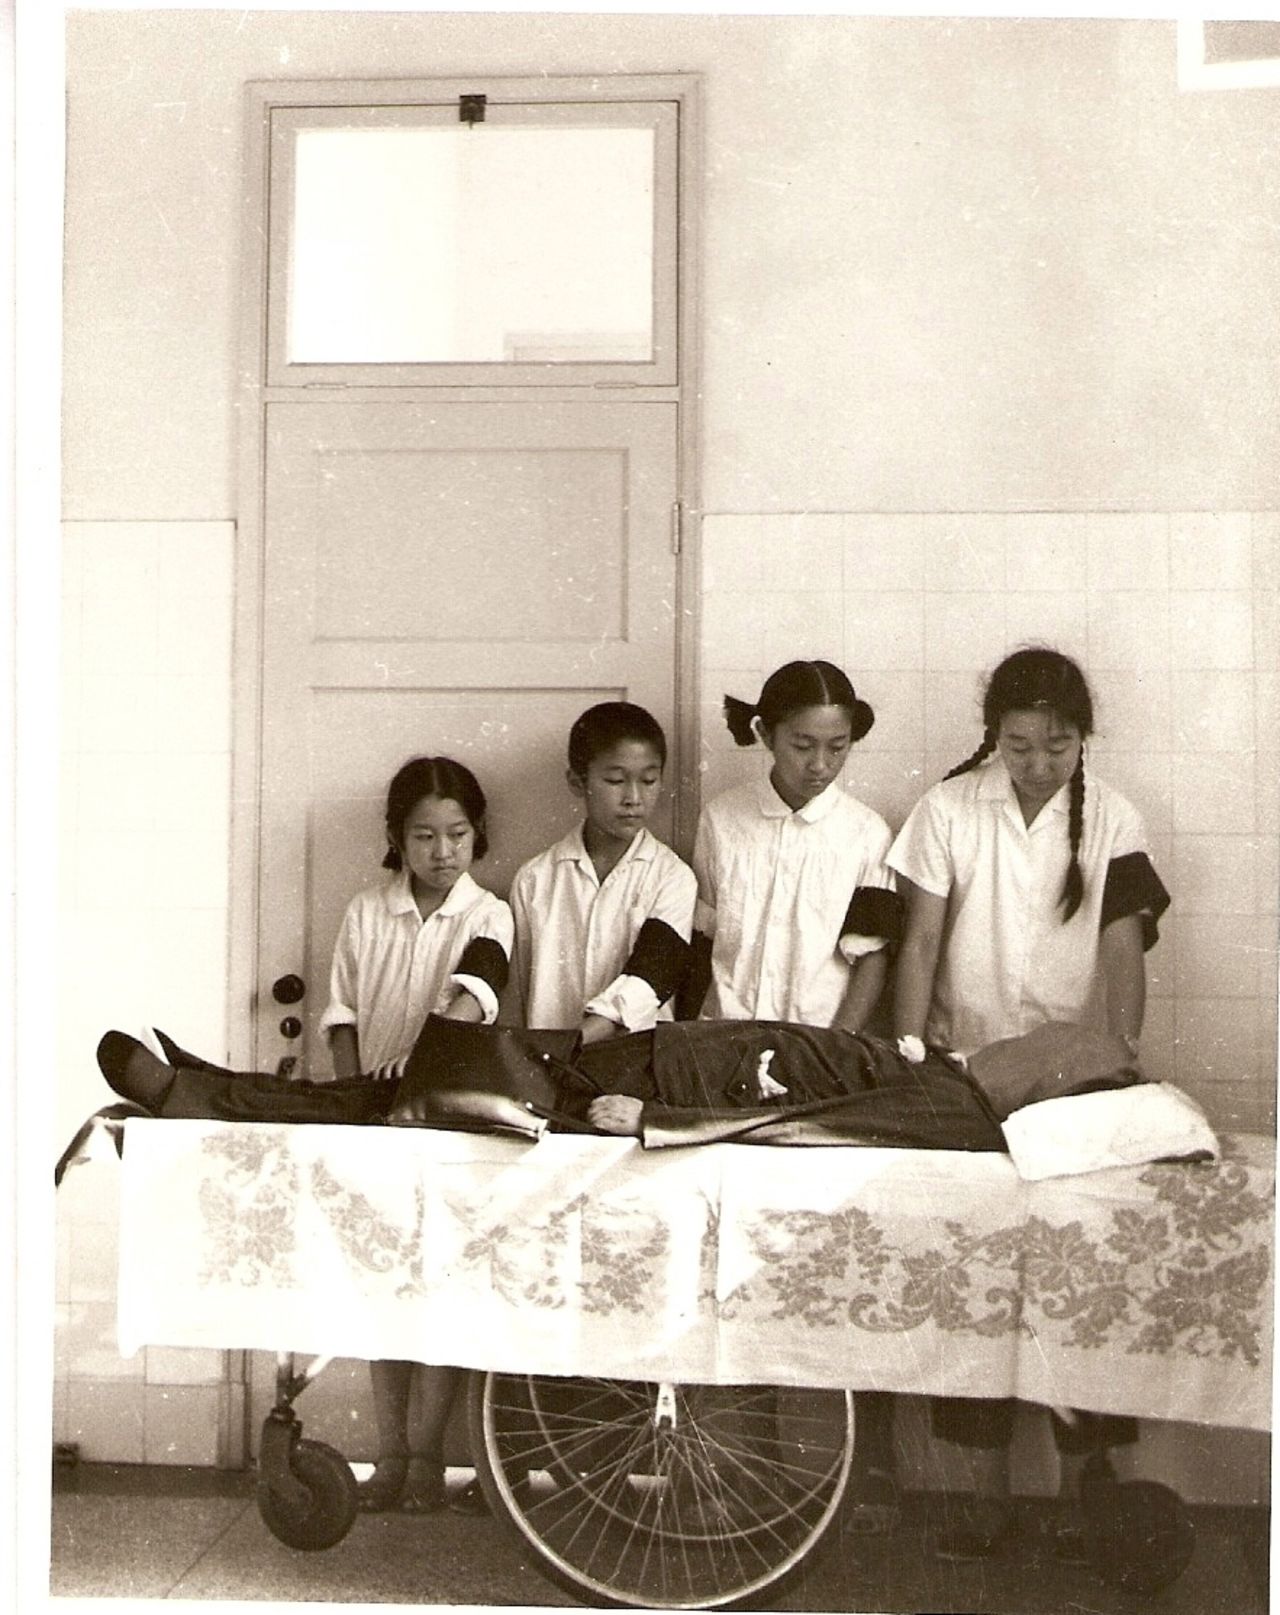 Bian Zhongyun's four children stand over her body after she was beaten to death on August 5th, 1966. Her husband Wang Jingyao took the photograph. "I covered Bian's face so my youngest couldn't see," he says.